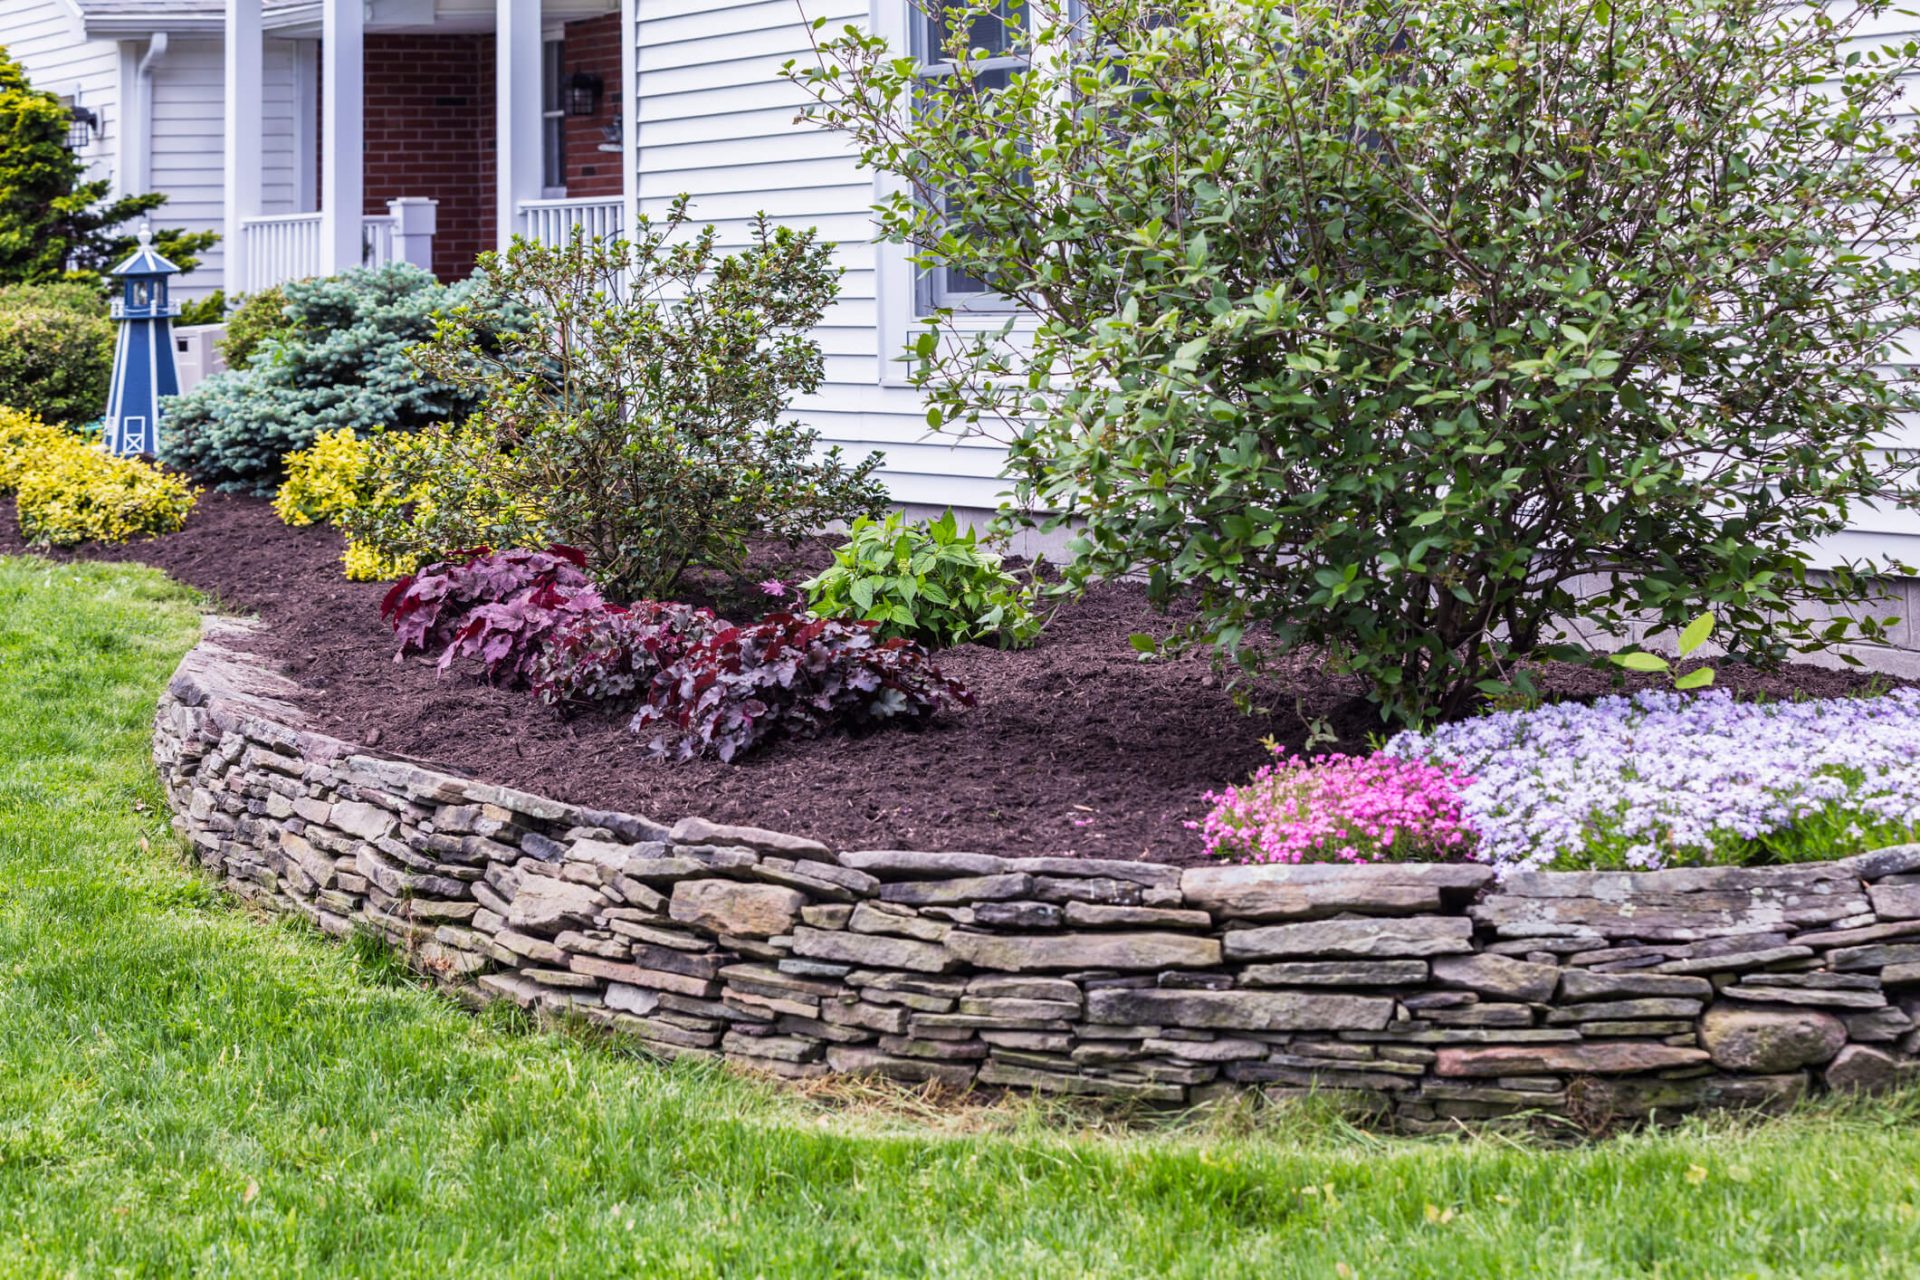 Mulch in a garden with a stone retaining wall.